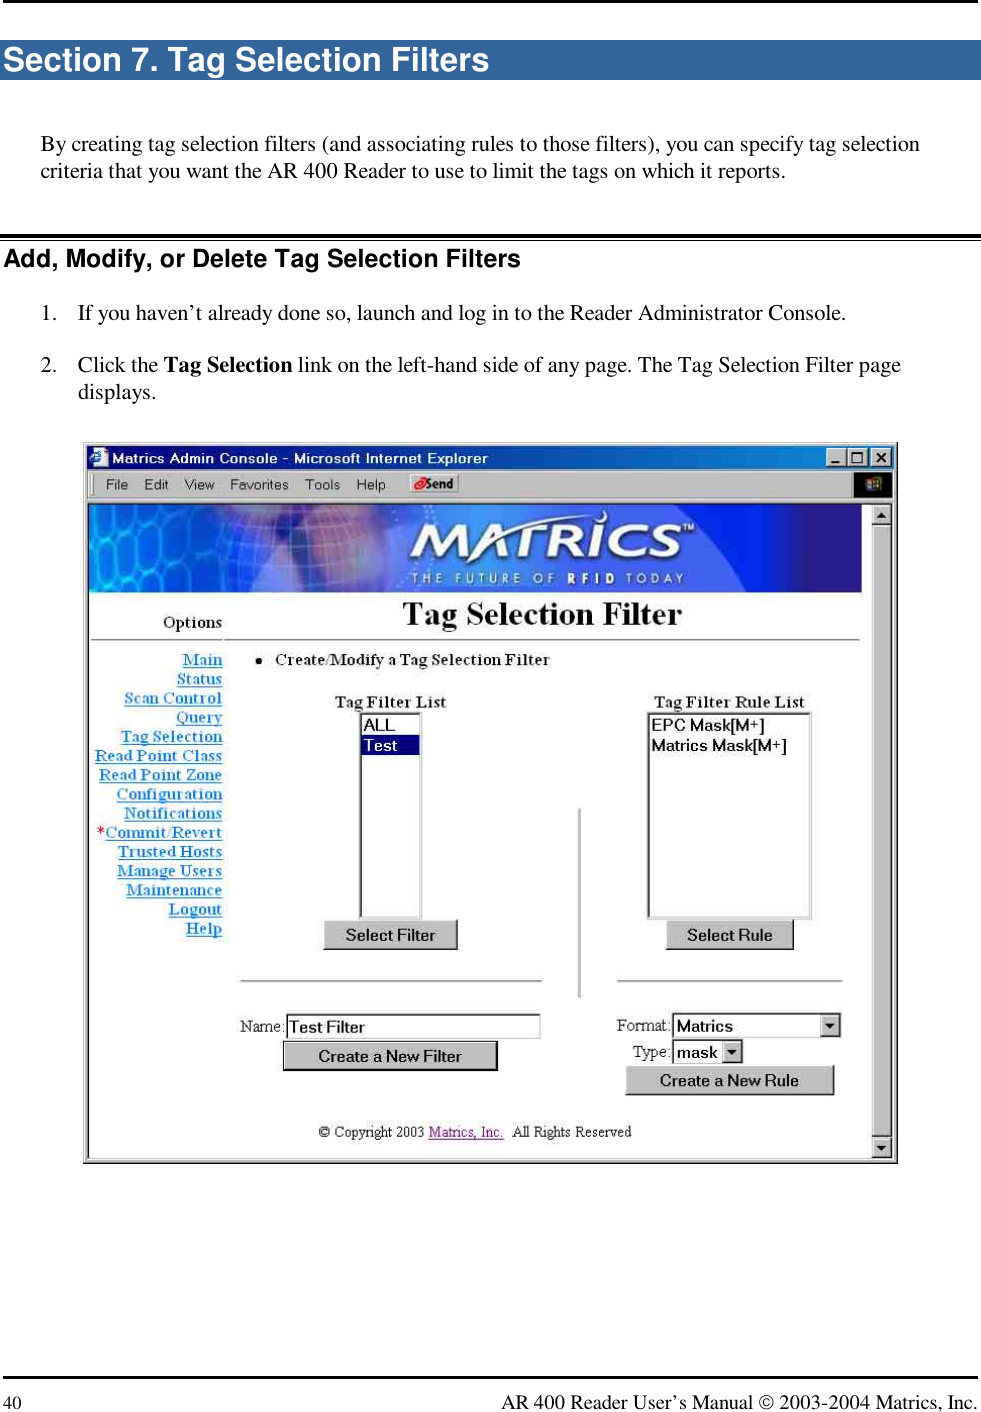  40  AR 400 Reader User’s Manual  2003-2004 Matrics, Inc. Section 7. Tag Selection Filters By creating tag selection filters (and associating rules to those filters), you can specify tag selection criteria that you want the AR 400 Reader to use to limit the tags on which it reports. Add, Modify, or Delete Tag Selection Filters 1.  If you haven’t already done so, launch and log in to the Reader Administrator Console. 2. Click the Tag Selection link on the left-hand side of any page. The Tag Selection Filter page displays.  